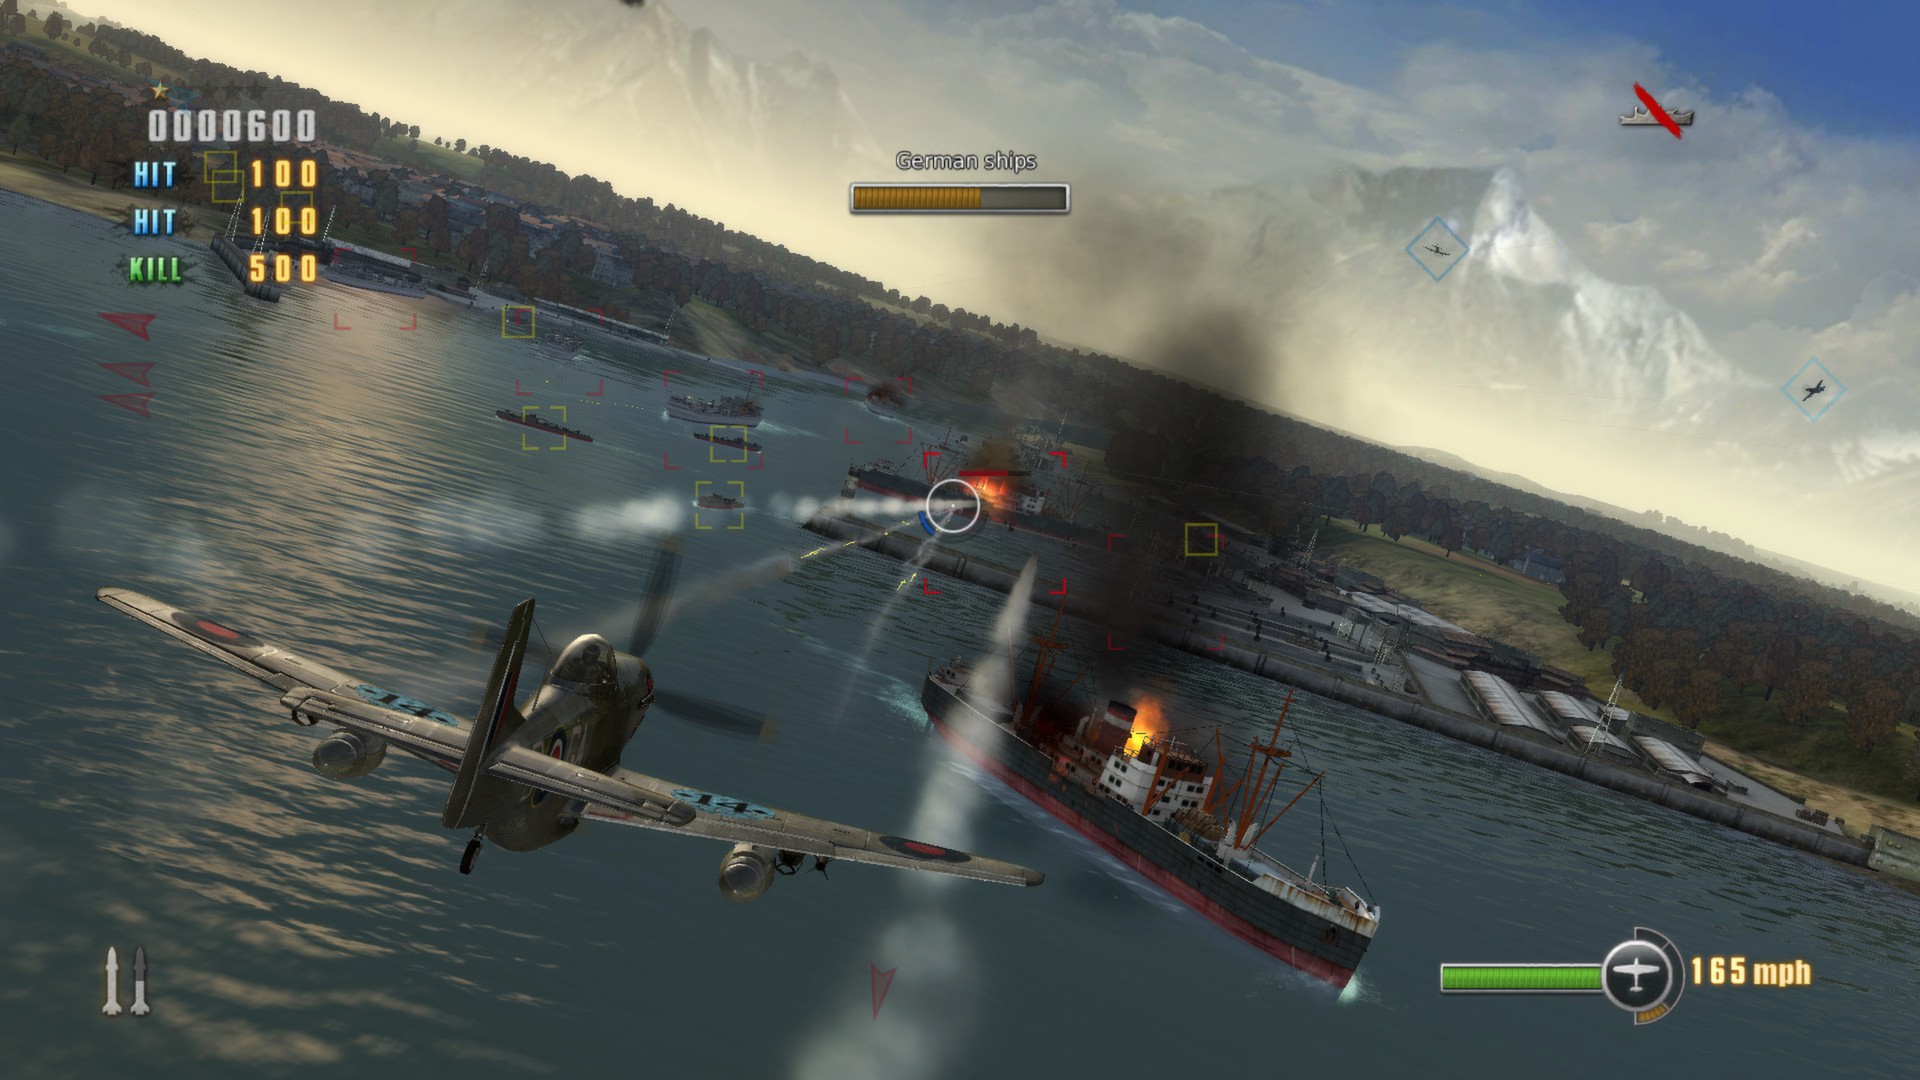 Догфайт. Игра Dogfight 1942. Dogfight 1942 ps3. Dogfight 1942 самолеты. Dogfight 1942 Limited Edition.